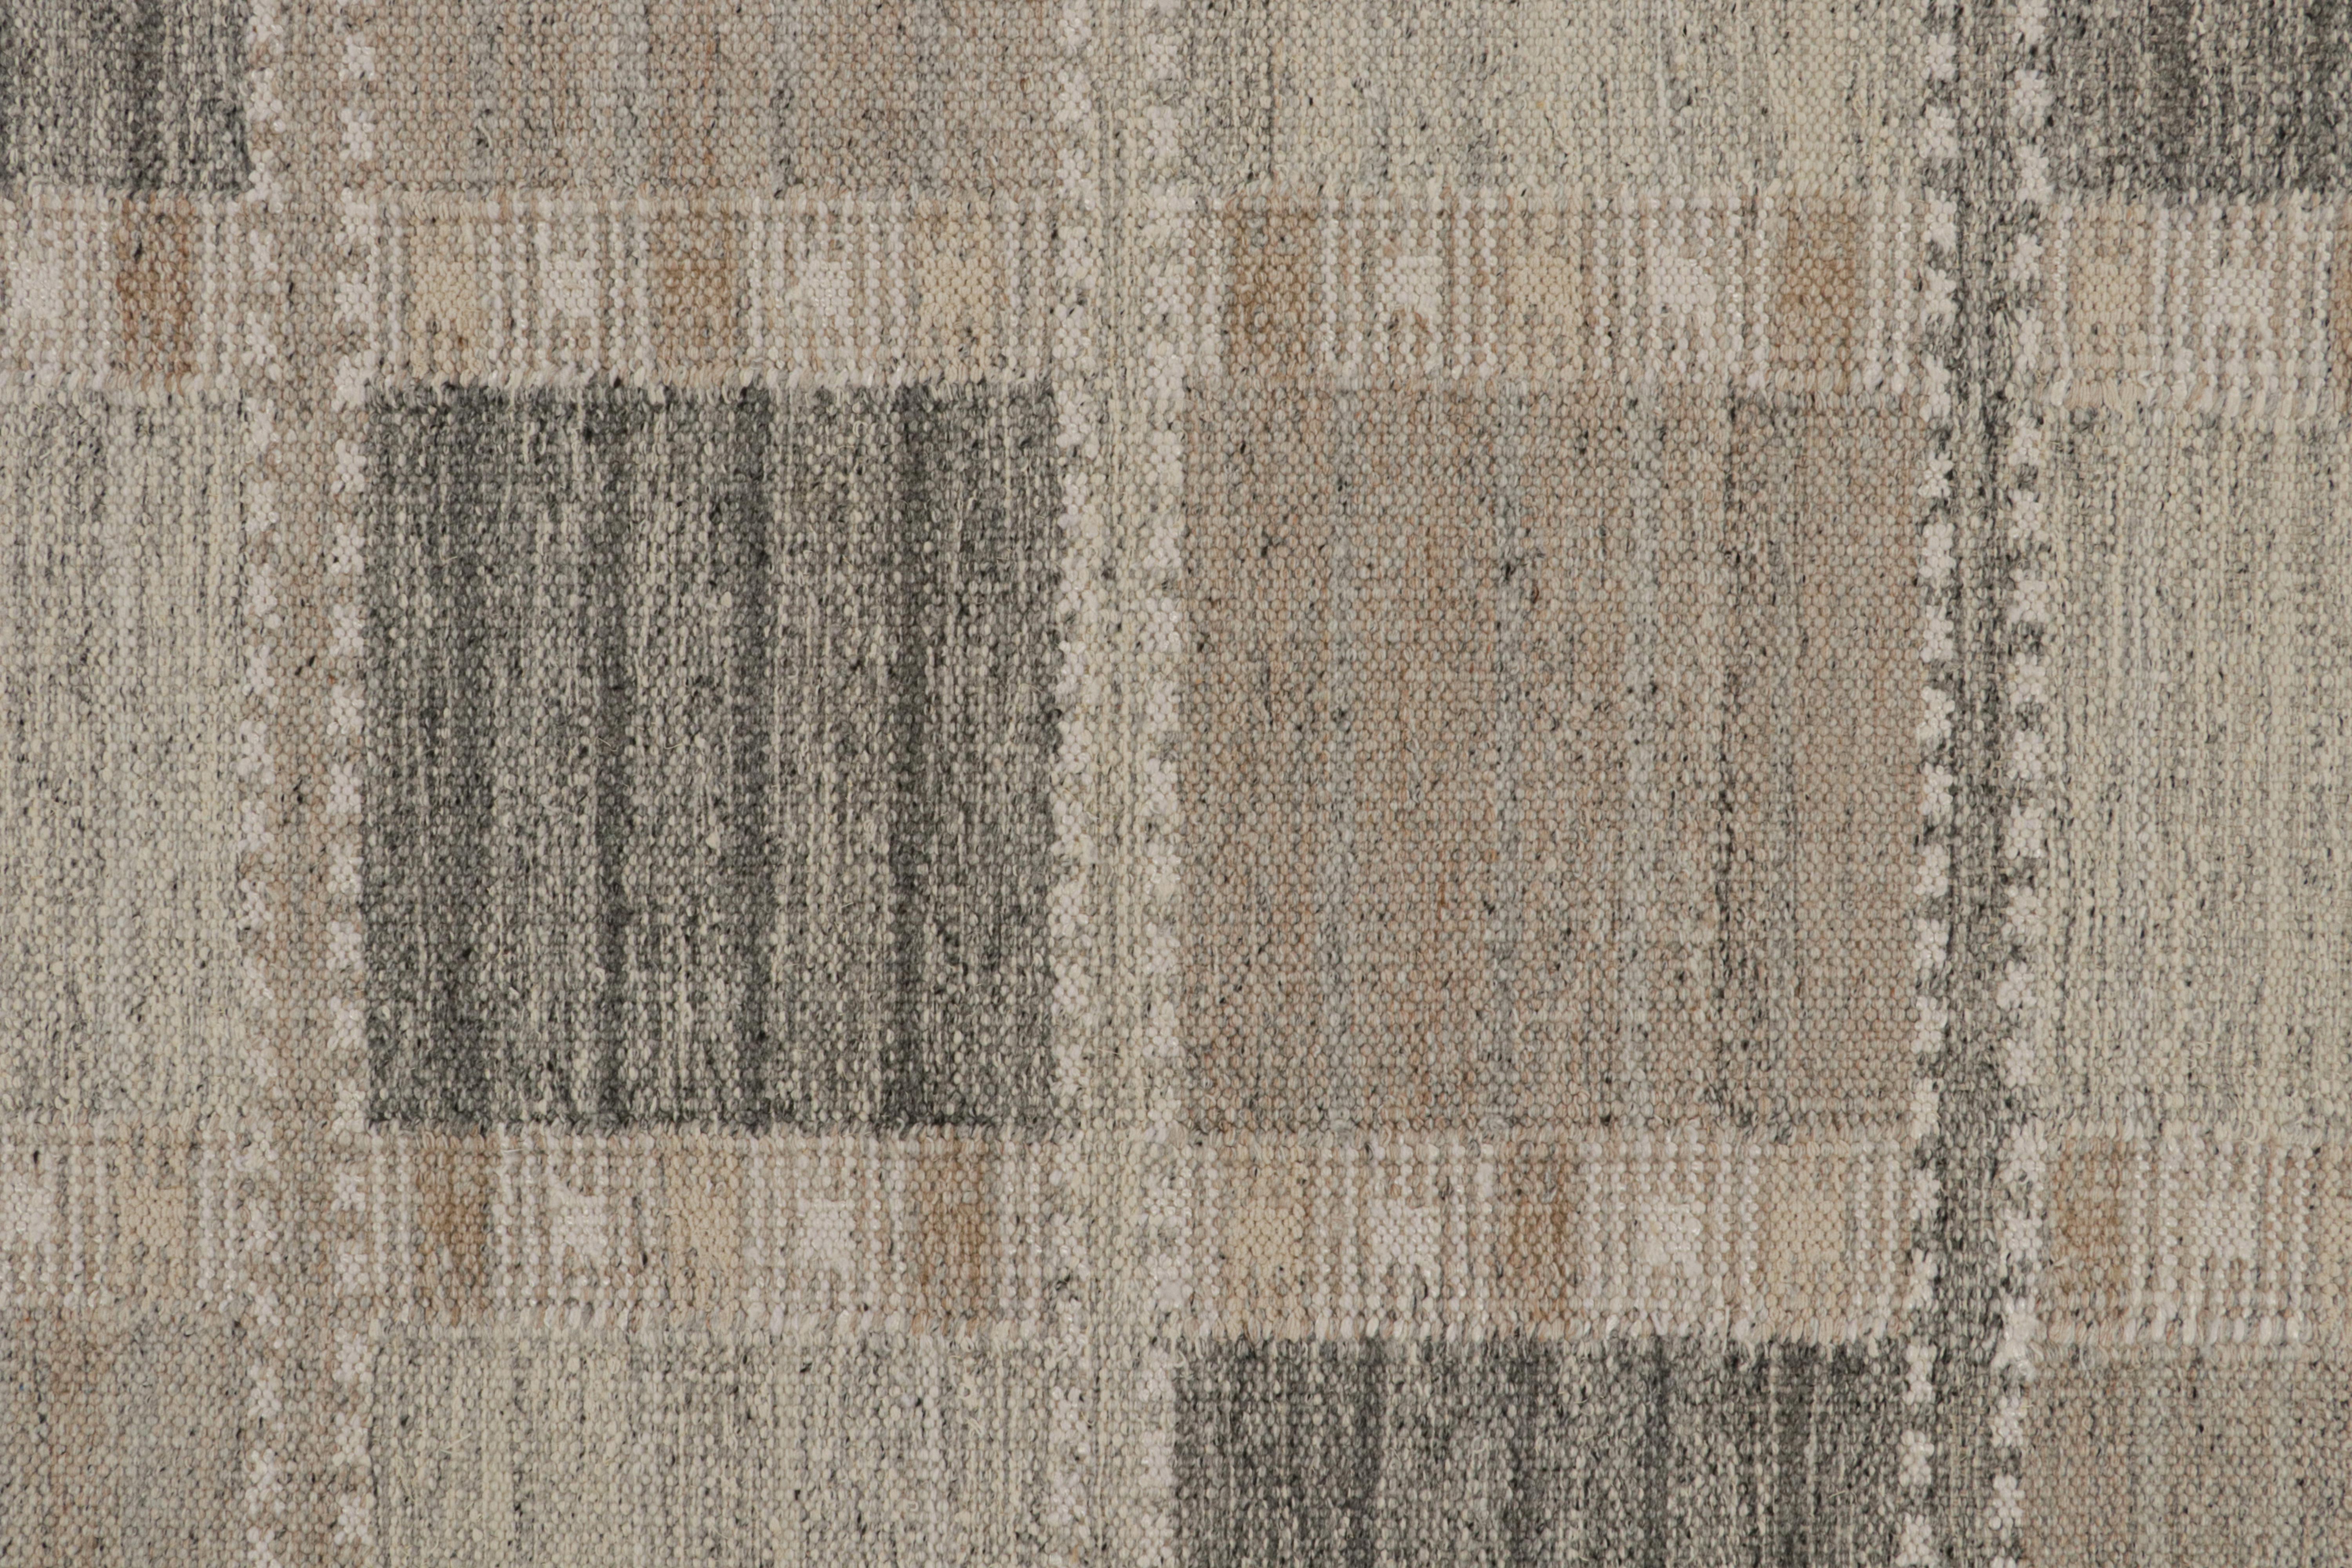 Rug & Kilim’s Scandinavian Style Kilim Rug in Beige and Gray Geometric Patterns In New Condition For Sale In Long Island City, NY